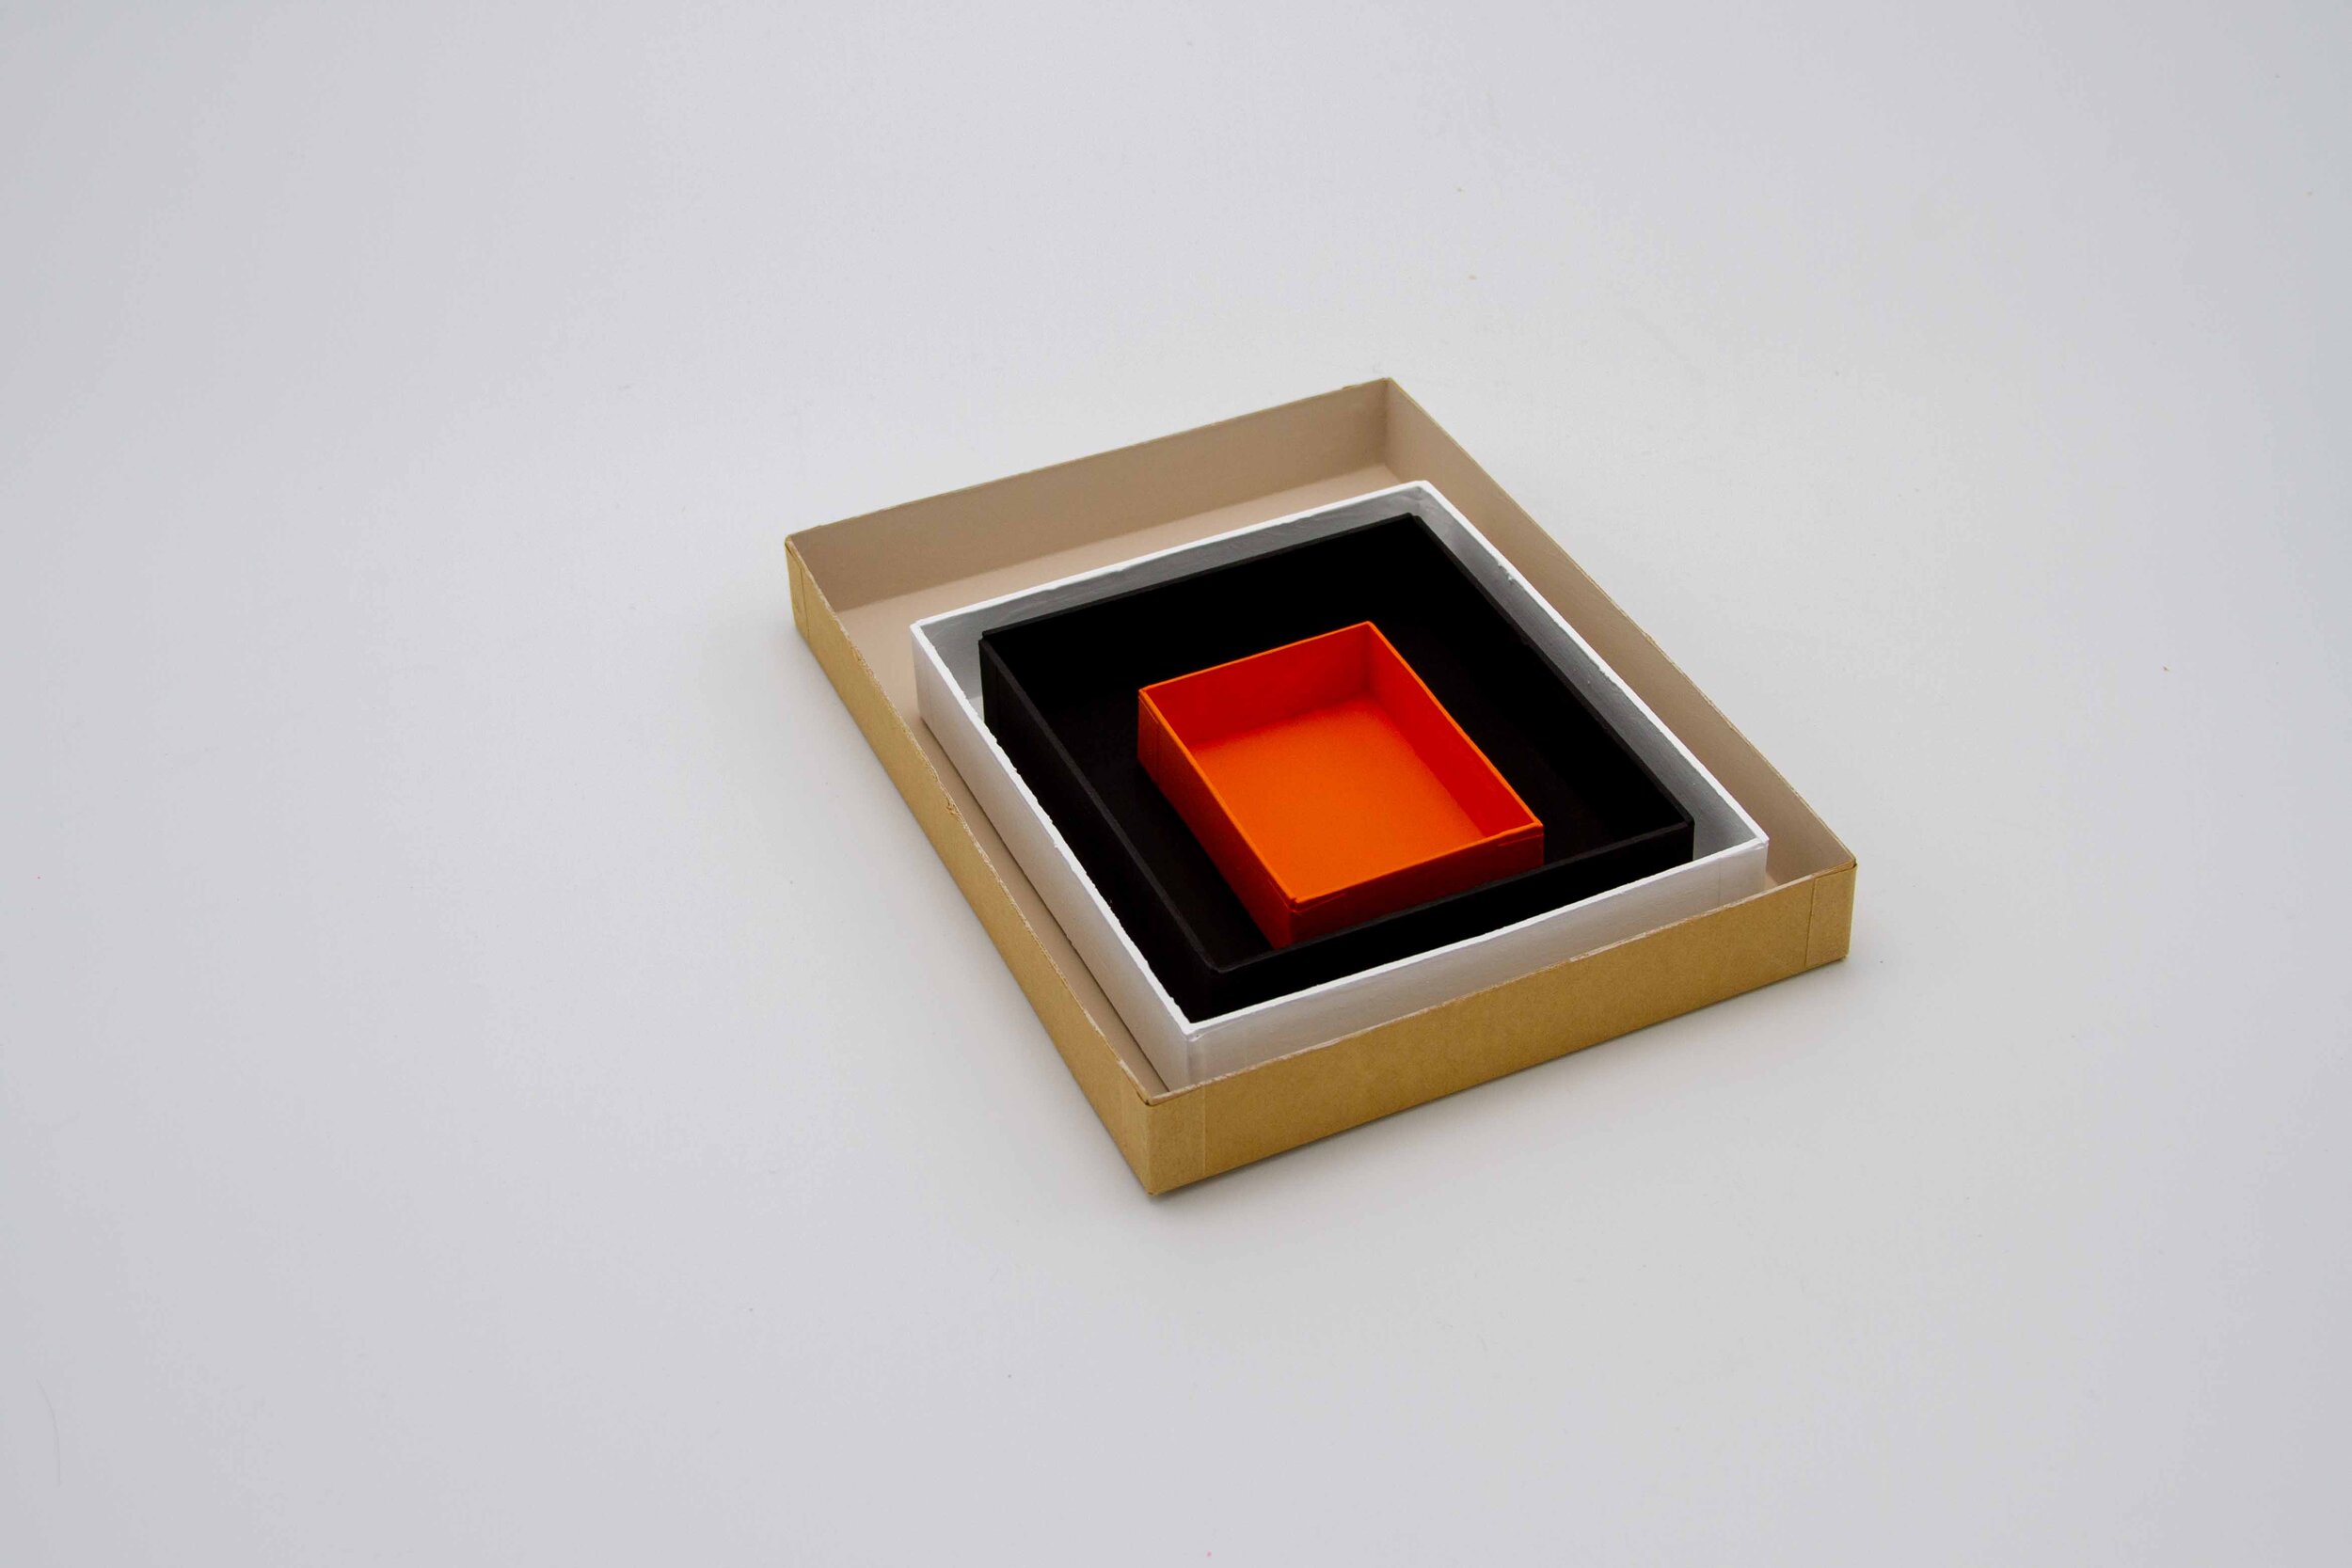 Homage to Albers', Homage to the Square: New Gate, 1951, 2020